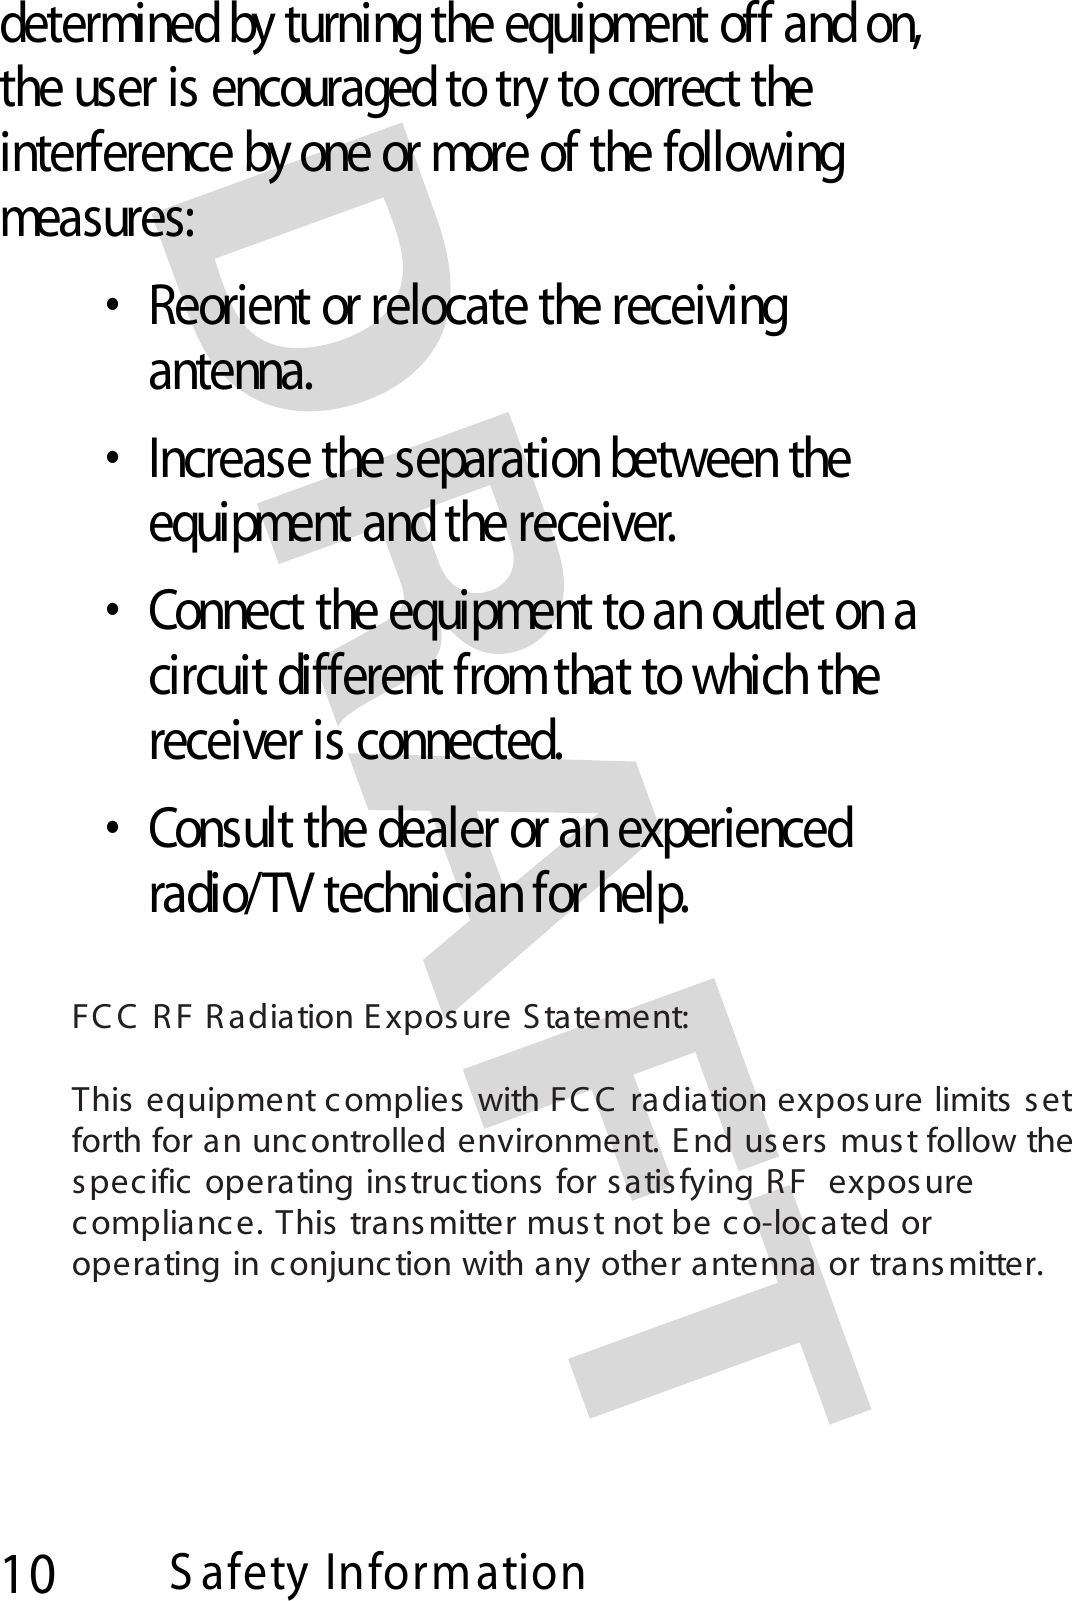 10S afety Informationdetermined by turning the equipment off and on,the user is encouraged to try to correct theinterference by one or more of the followingmea s ur es :•Reorient or relocate the receivingantenna.•Increase the separation between theequipment and the receiver.•Connecttheequipmenttoanoutletonacircuit different fromthat to which thereceiver is connected.•Consult the dealer or an experiencedradio/TV technician for help.FCC RF Radiation Exposure Statement:This equipment c omplies with FC C radiation expos ure limits s etforth for an uncontrolled environment. End users must follow thespecific operating instructions for satisfying RF exposurecompliance. This transmitter must notbe co-located orope ra ting in c onjunc tion with a ny other a nte nna or tra ns mitte r.